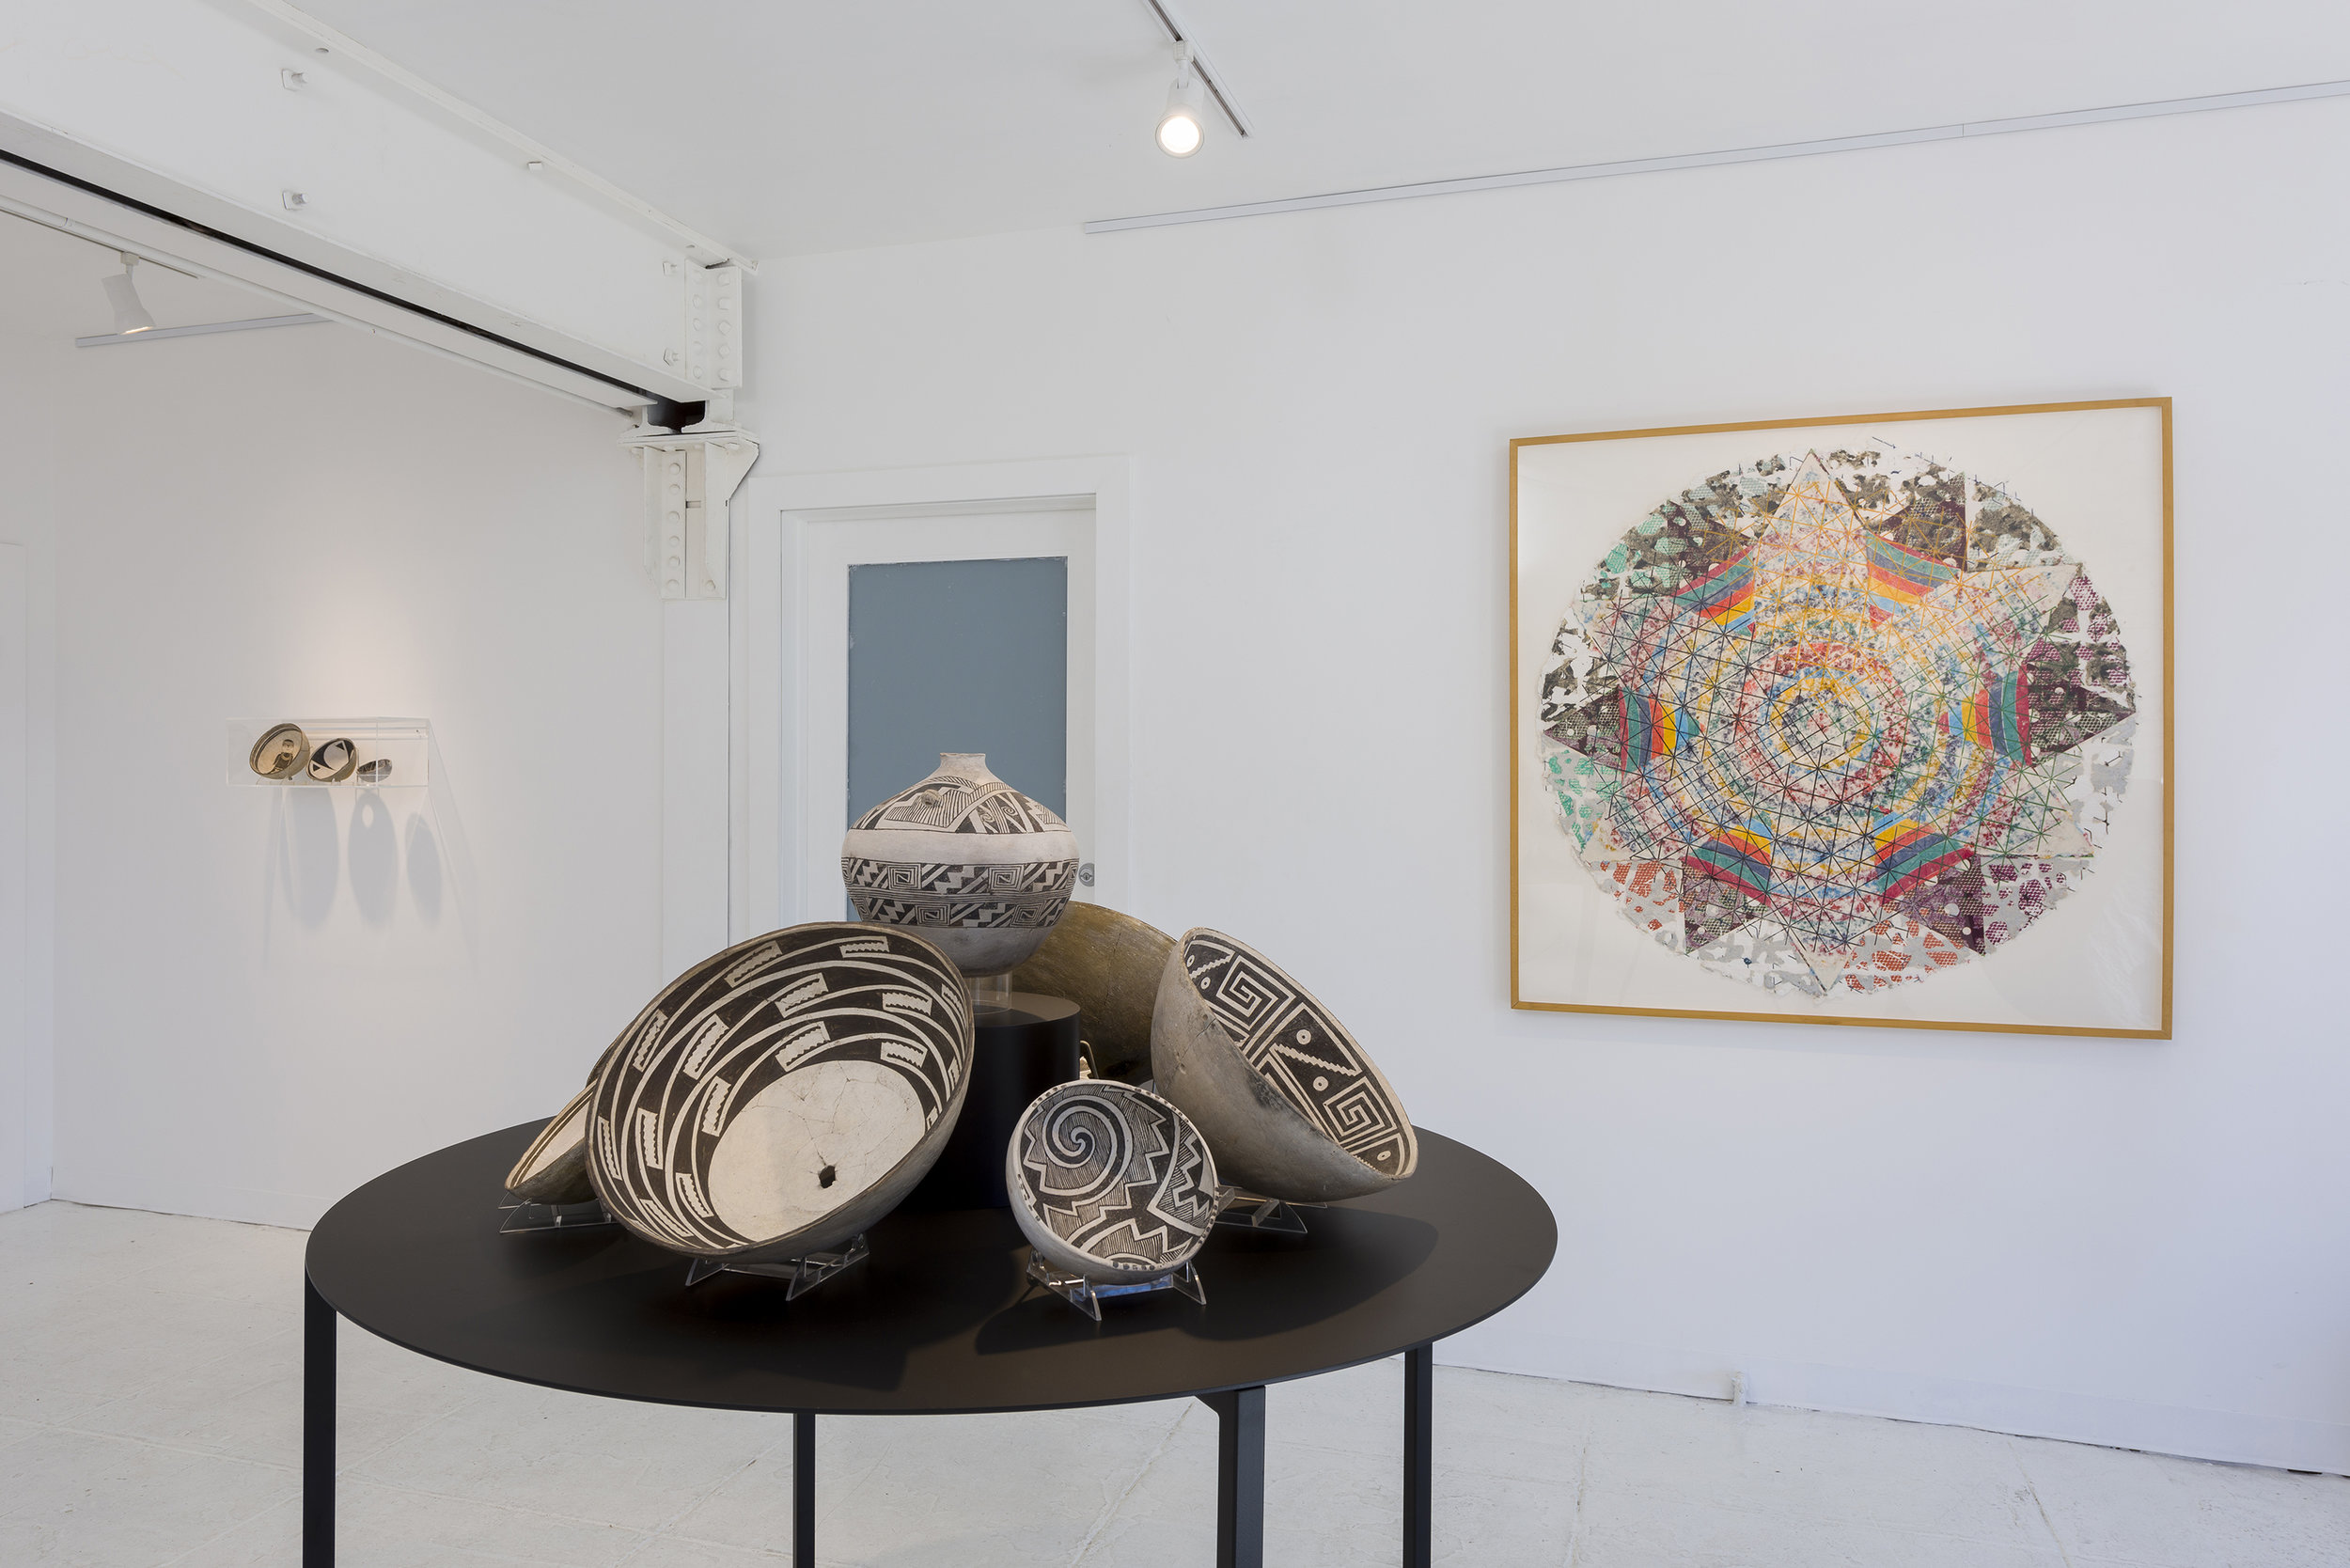  Installation view of  Rupture of Plane: Alan Shields + Mimbres Painted Pottery   September 9 - October 7, 2018  Photo by Ruben Diaz   Link to Exhibition Text  